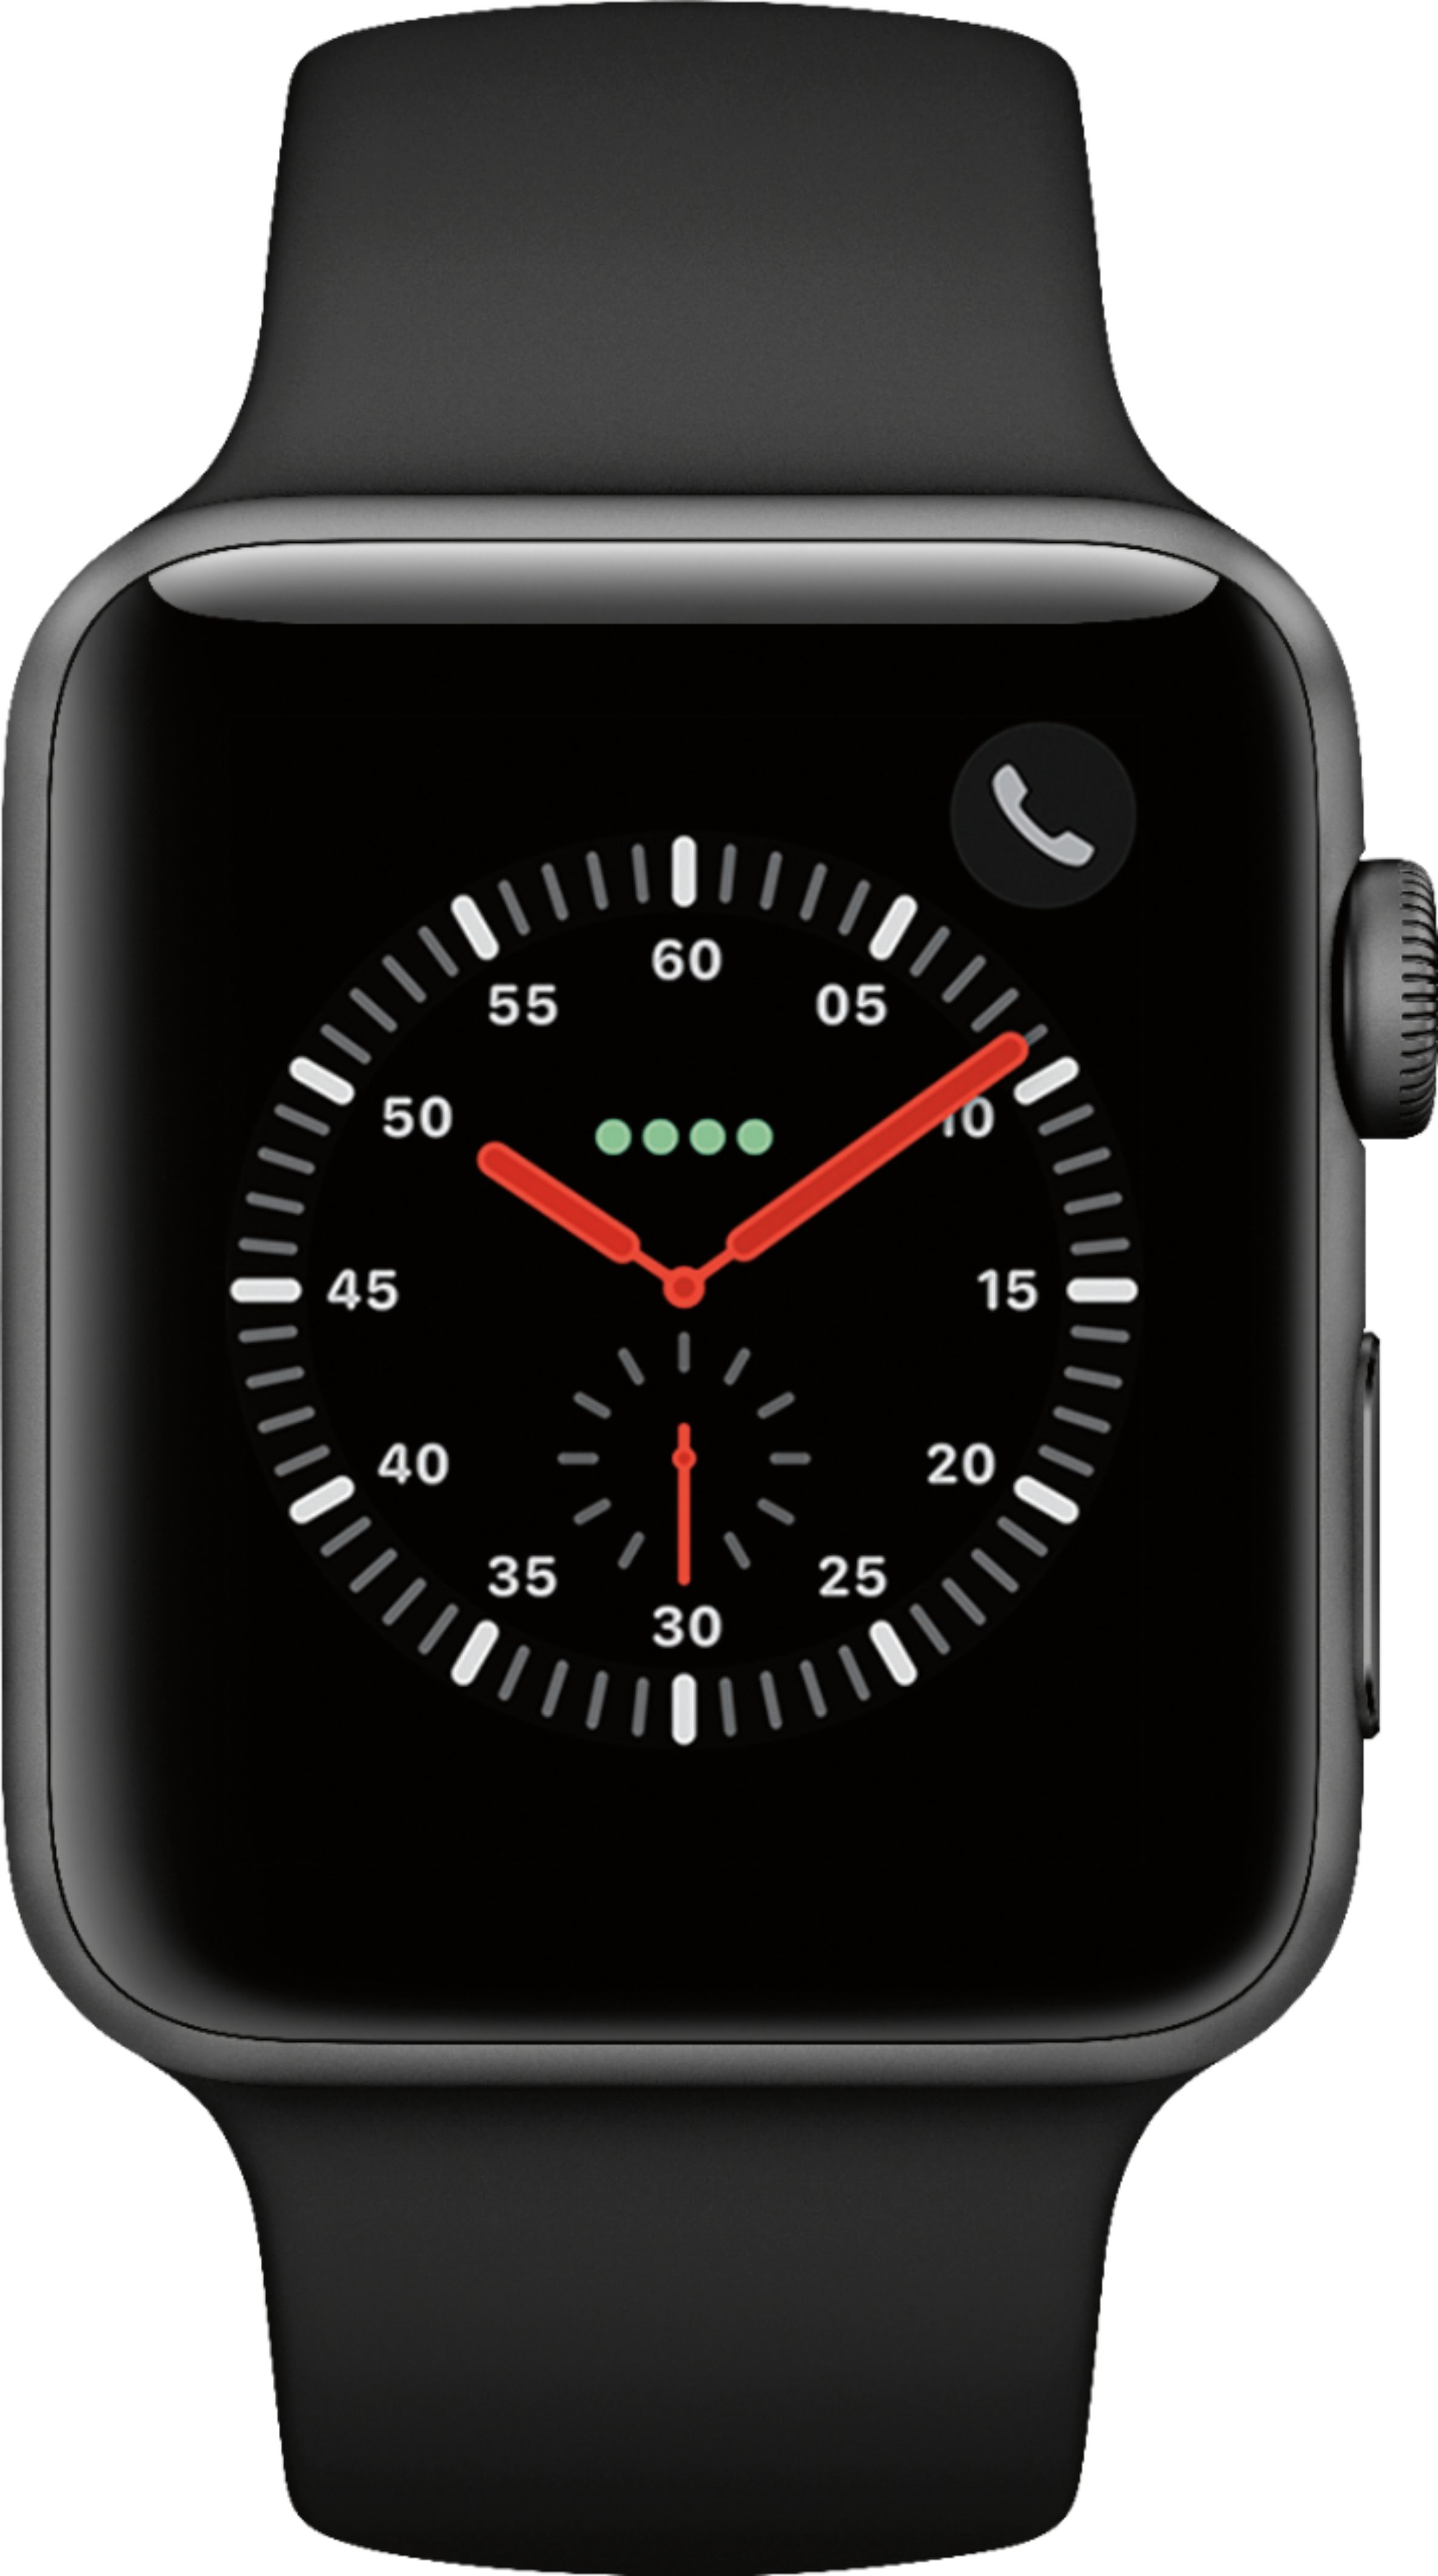 Questions and Answers: Apple Watch Series 3 (GPS + Cellular) 42mm Space Gray Aluminum Case with 